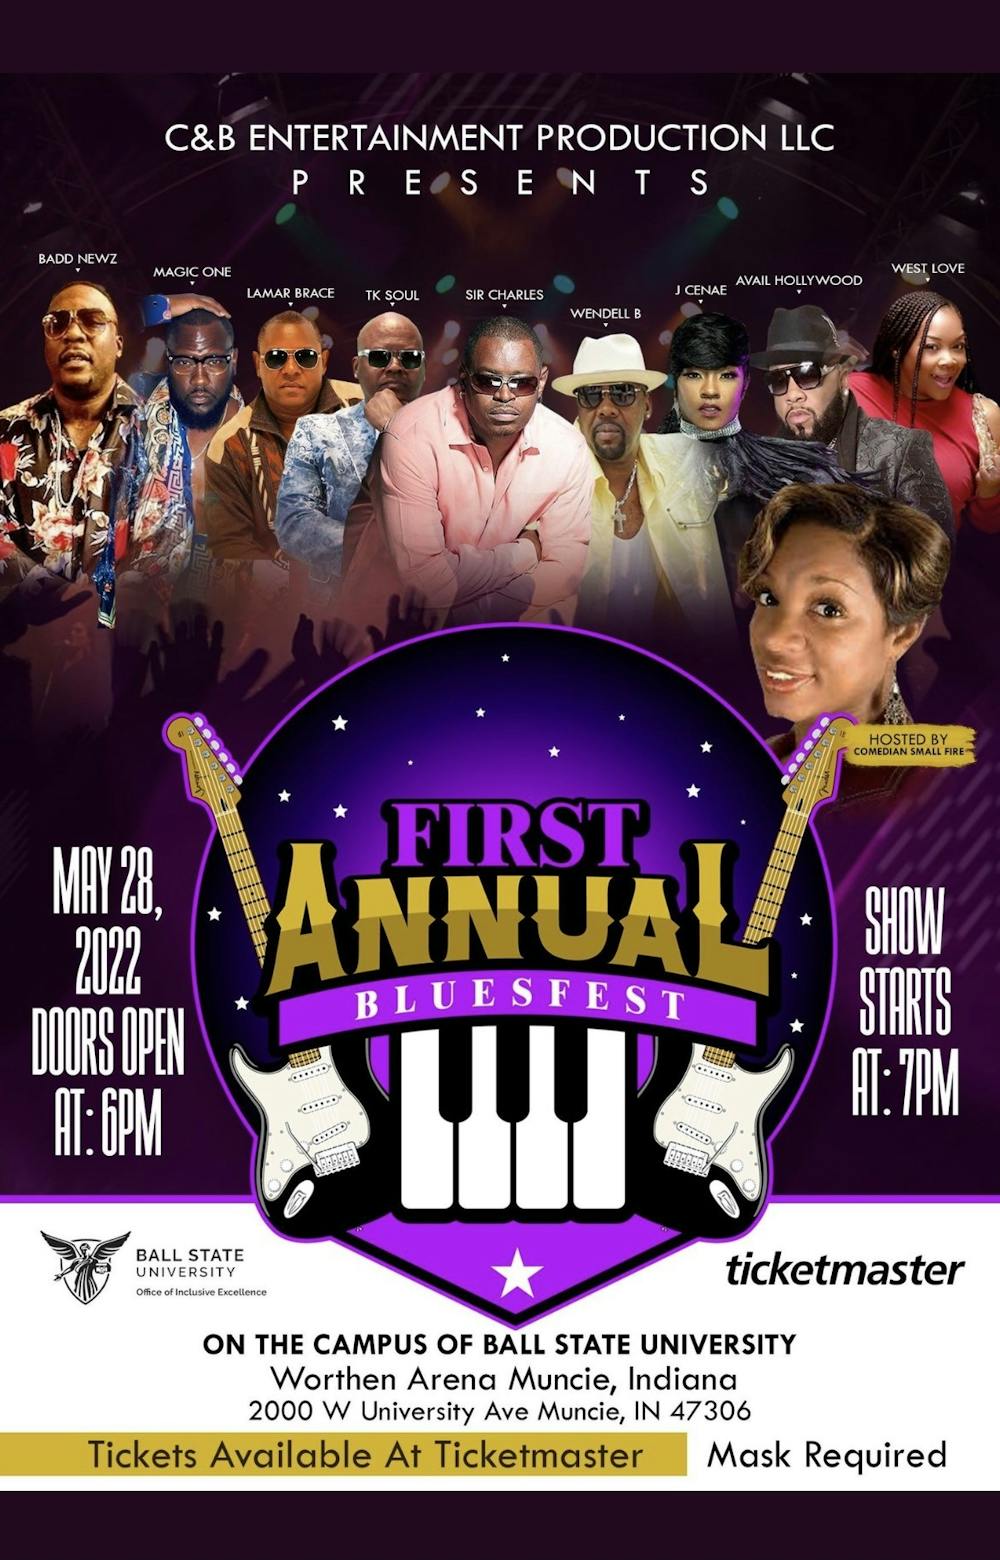 First Annual Bluesfest comes to Ball State University